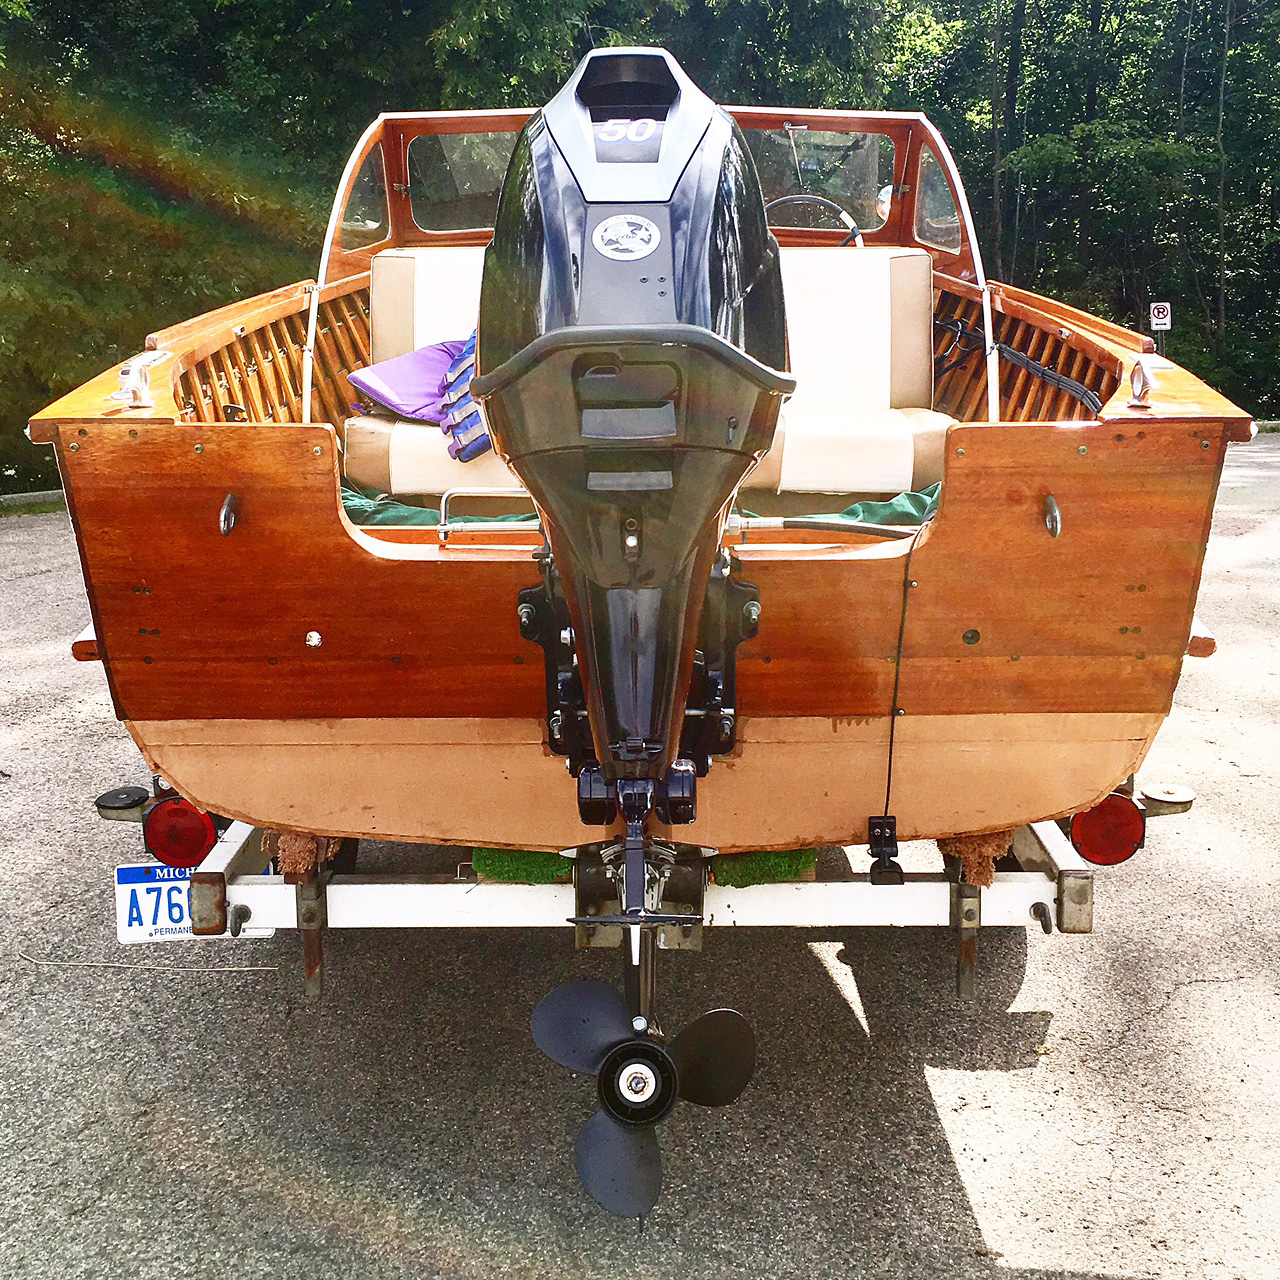 New Tohatsu Repower On Vintage Wood Boat